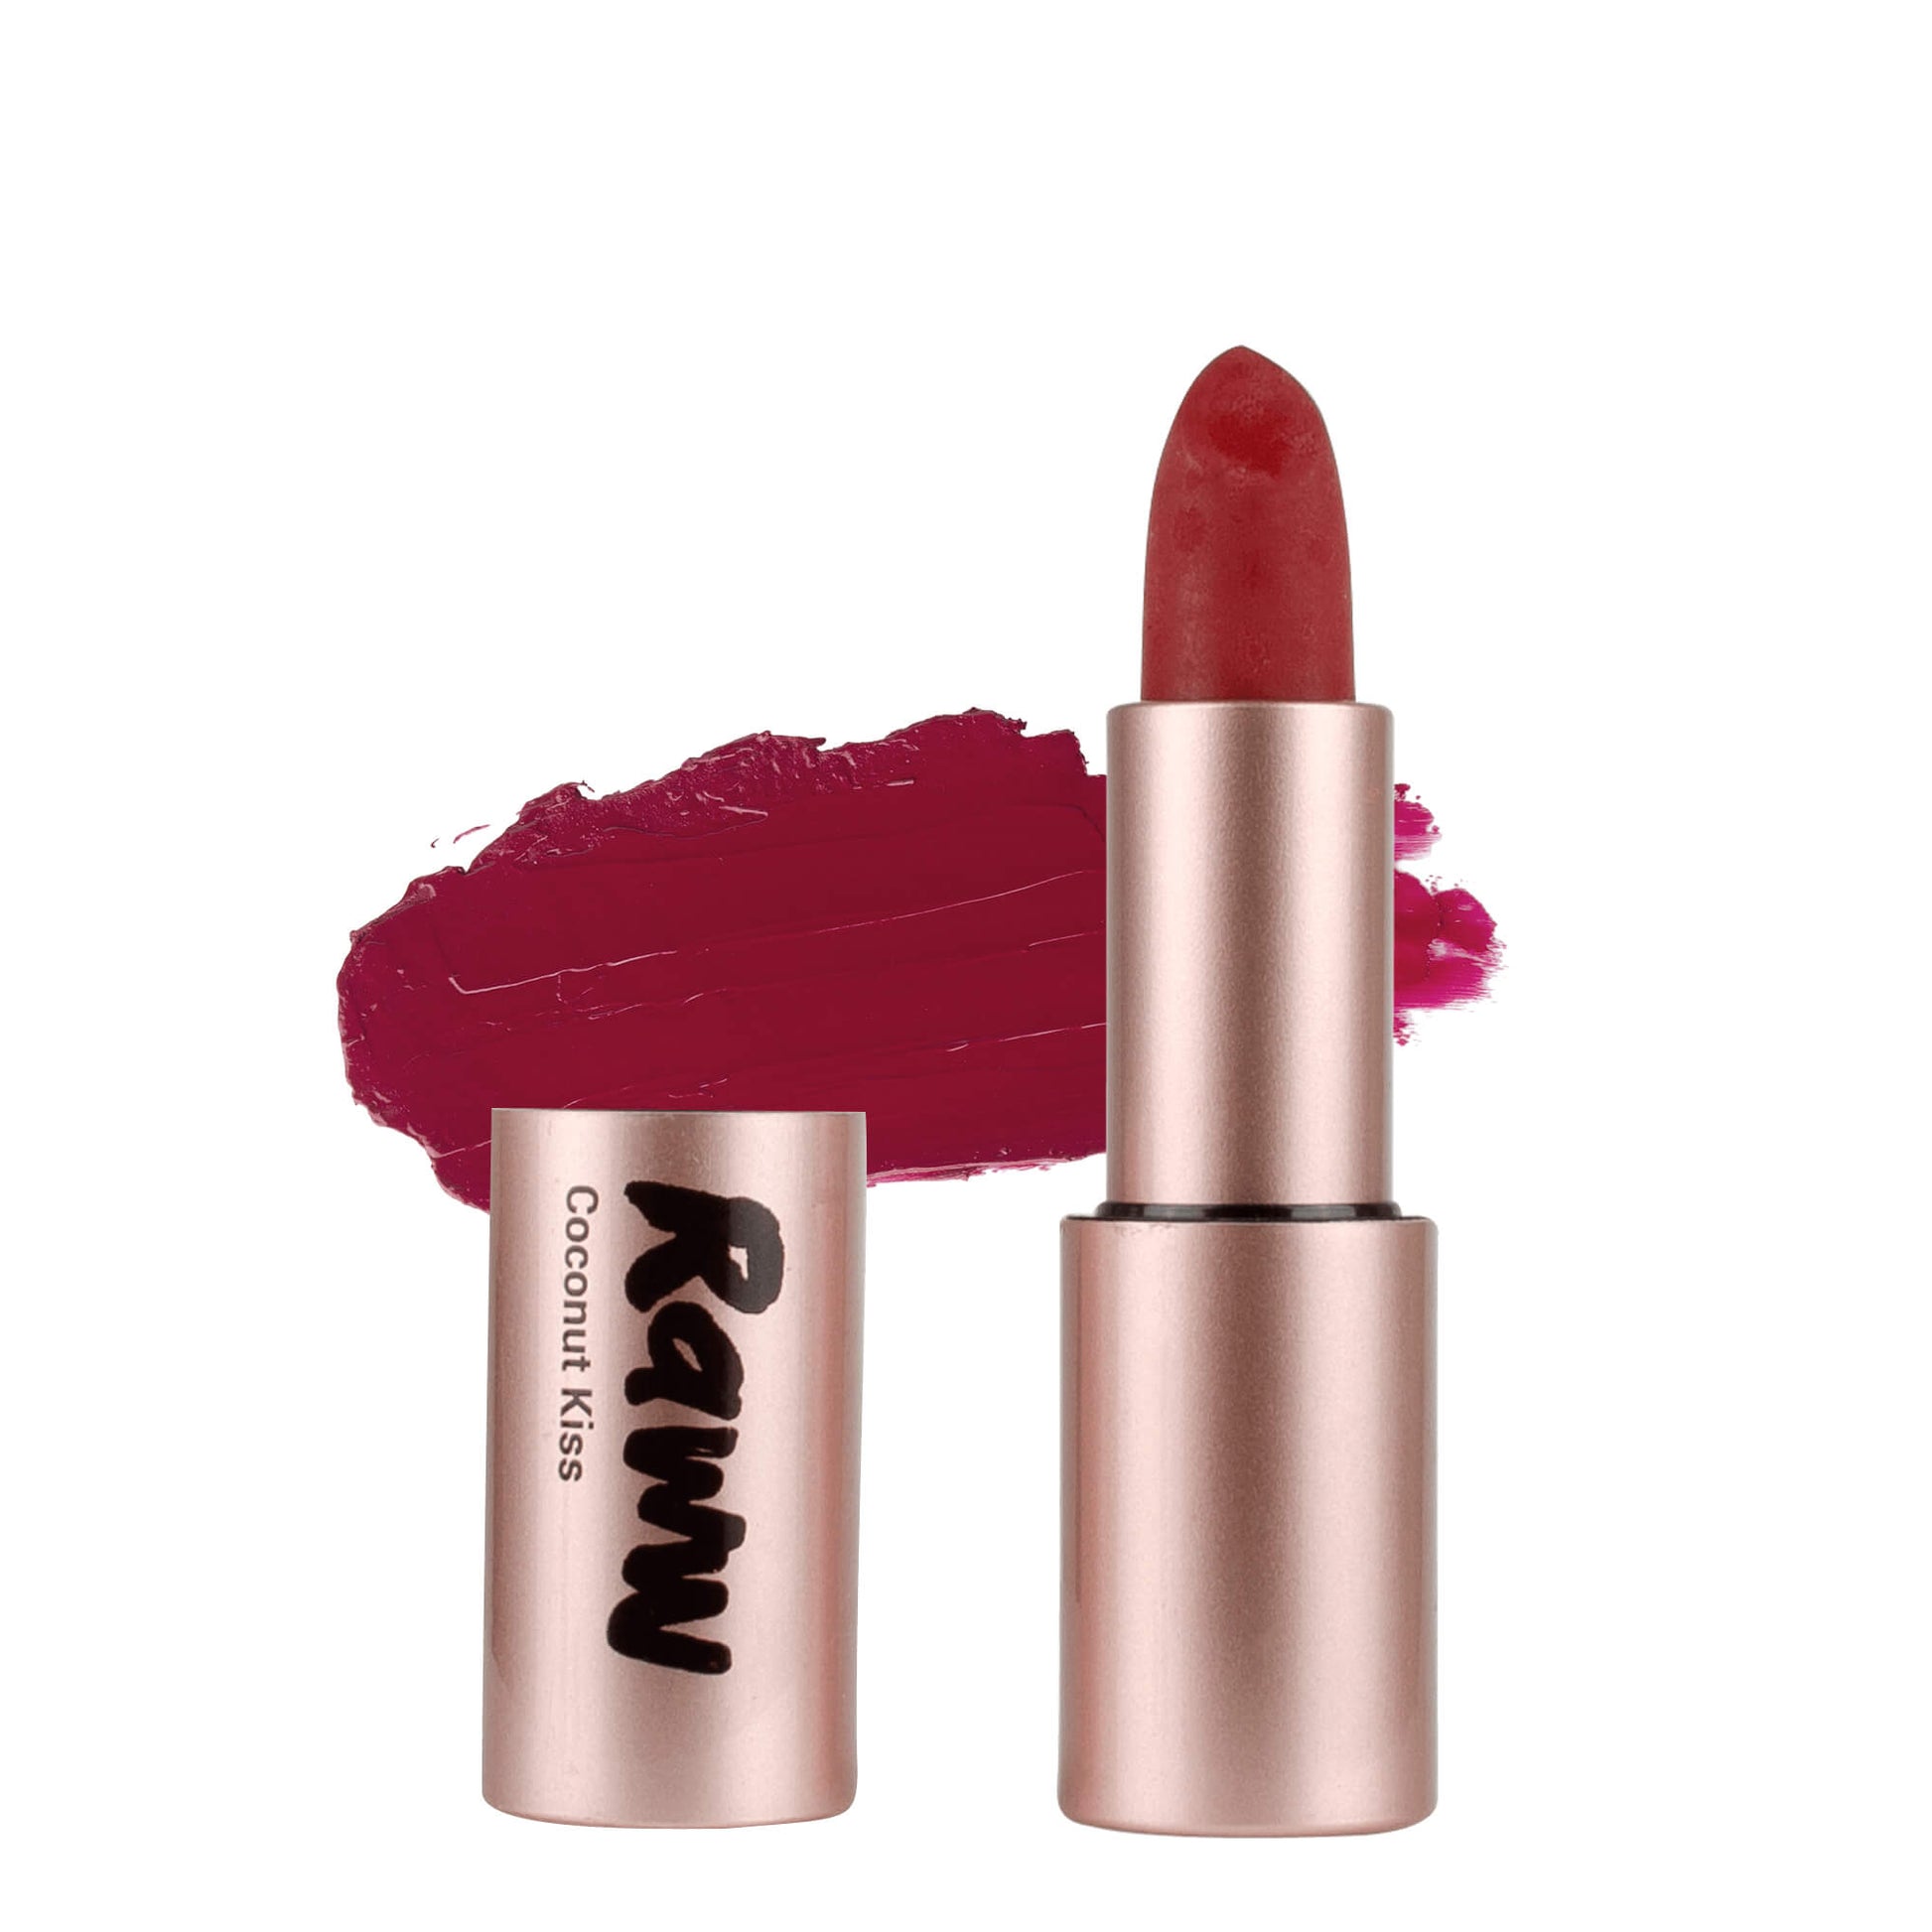 Coconut Kiss Lipstick (Candy Apple) | RAWW Cosmetics | Product + Swatch